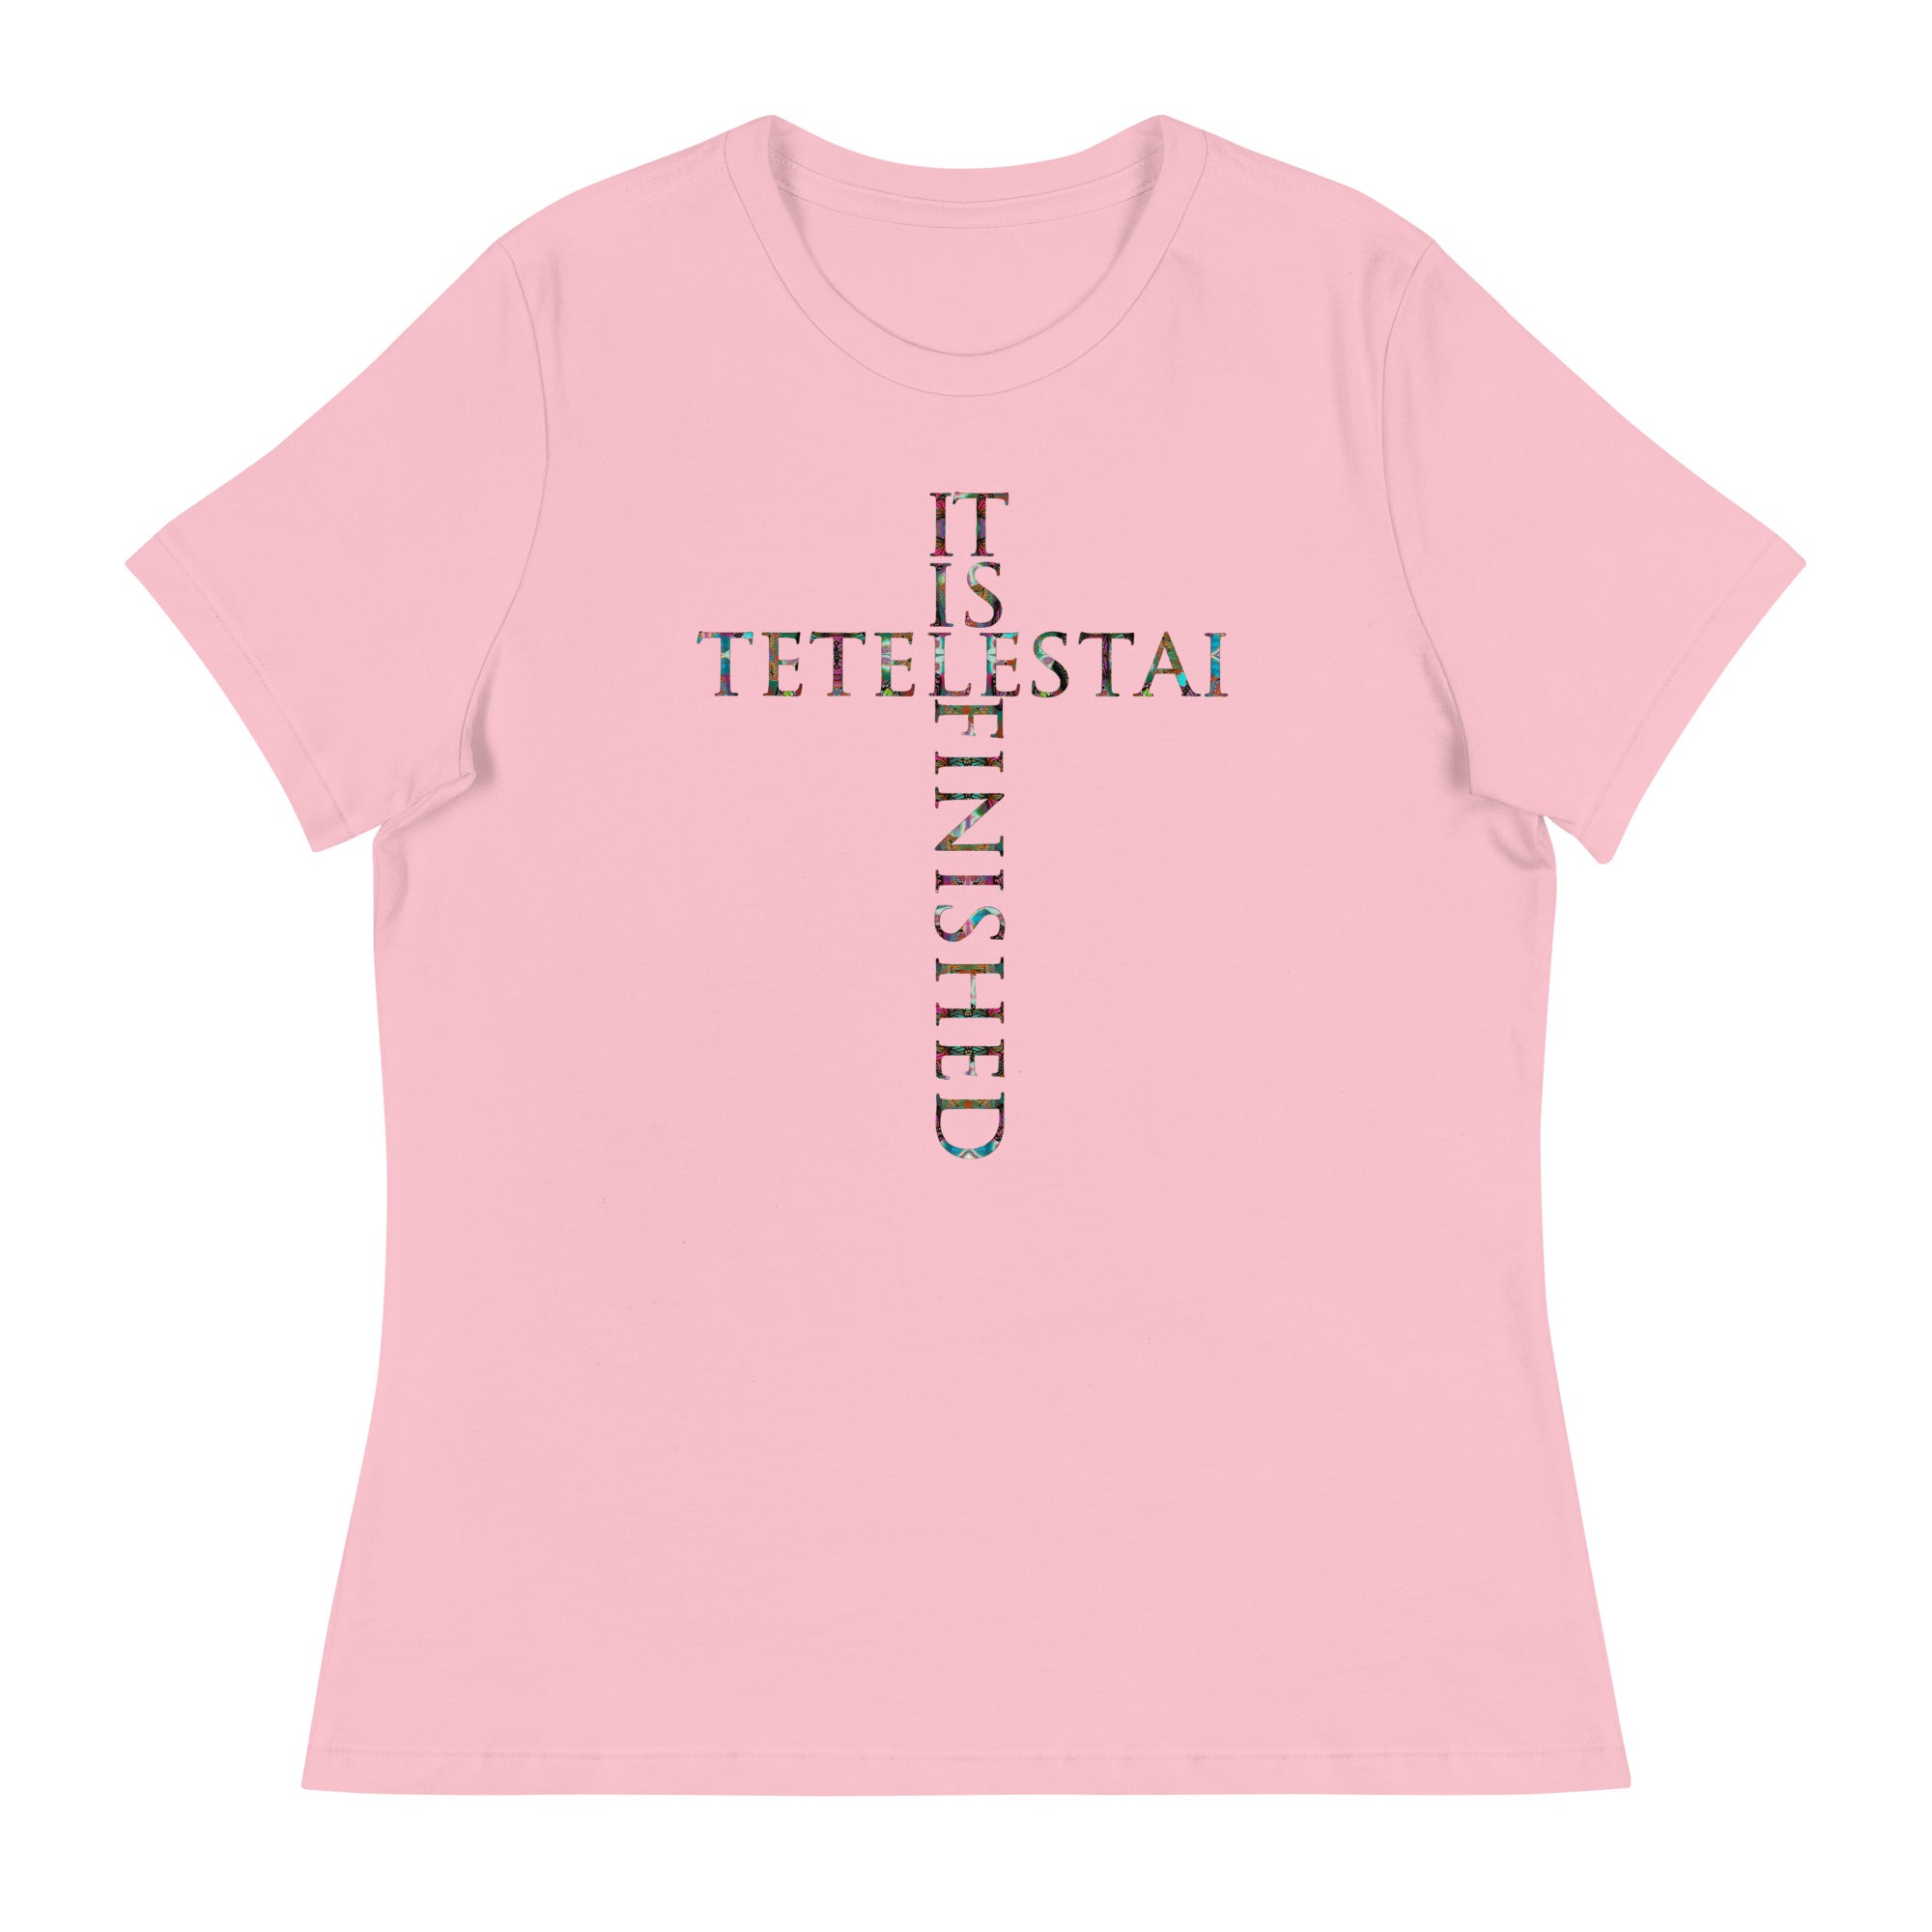 Tetelestai - It is Finished  ~ Butterfly Word Art Women's Graphic T-shirt, Short Sleeve Religious Spiritual Top